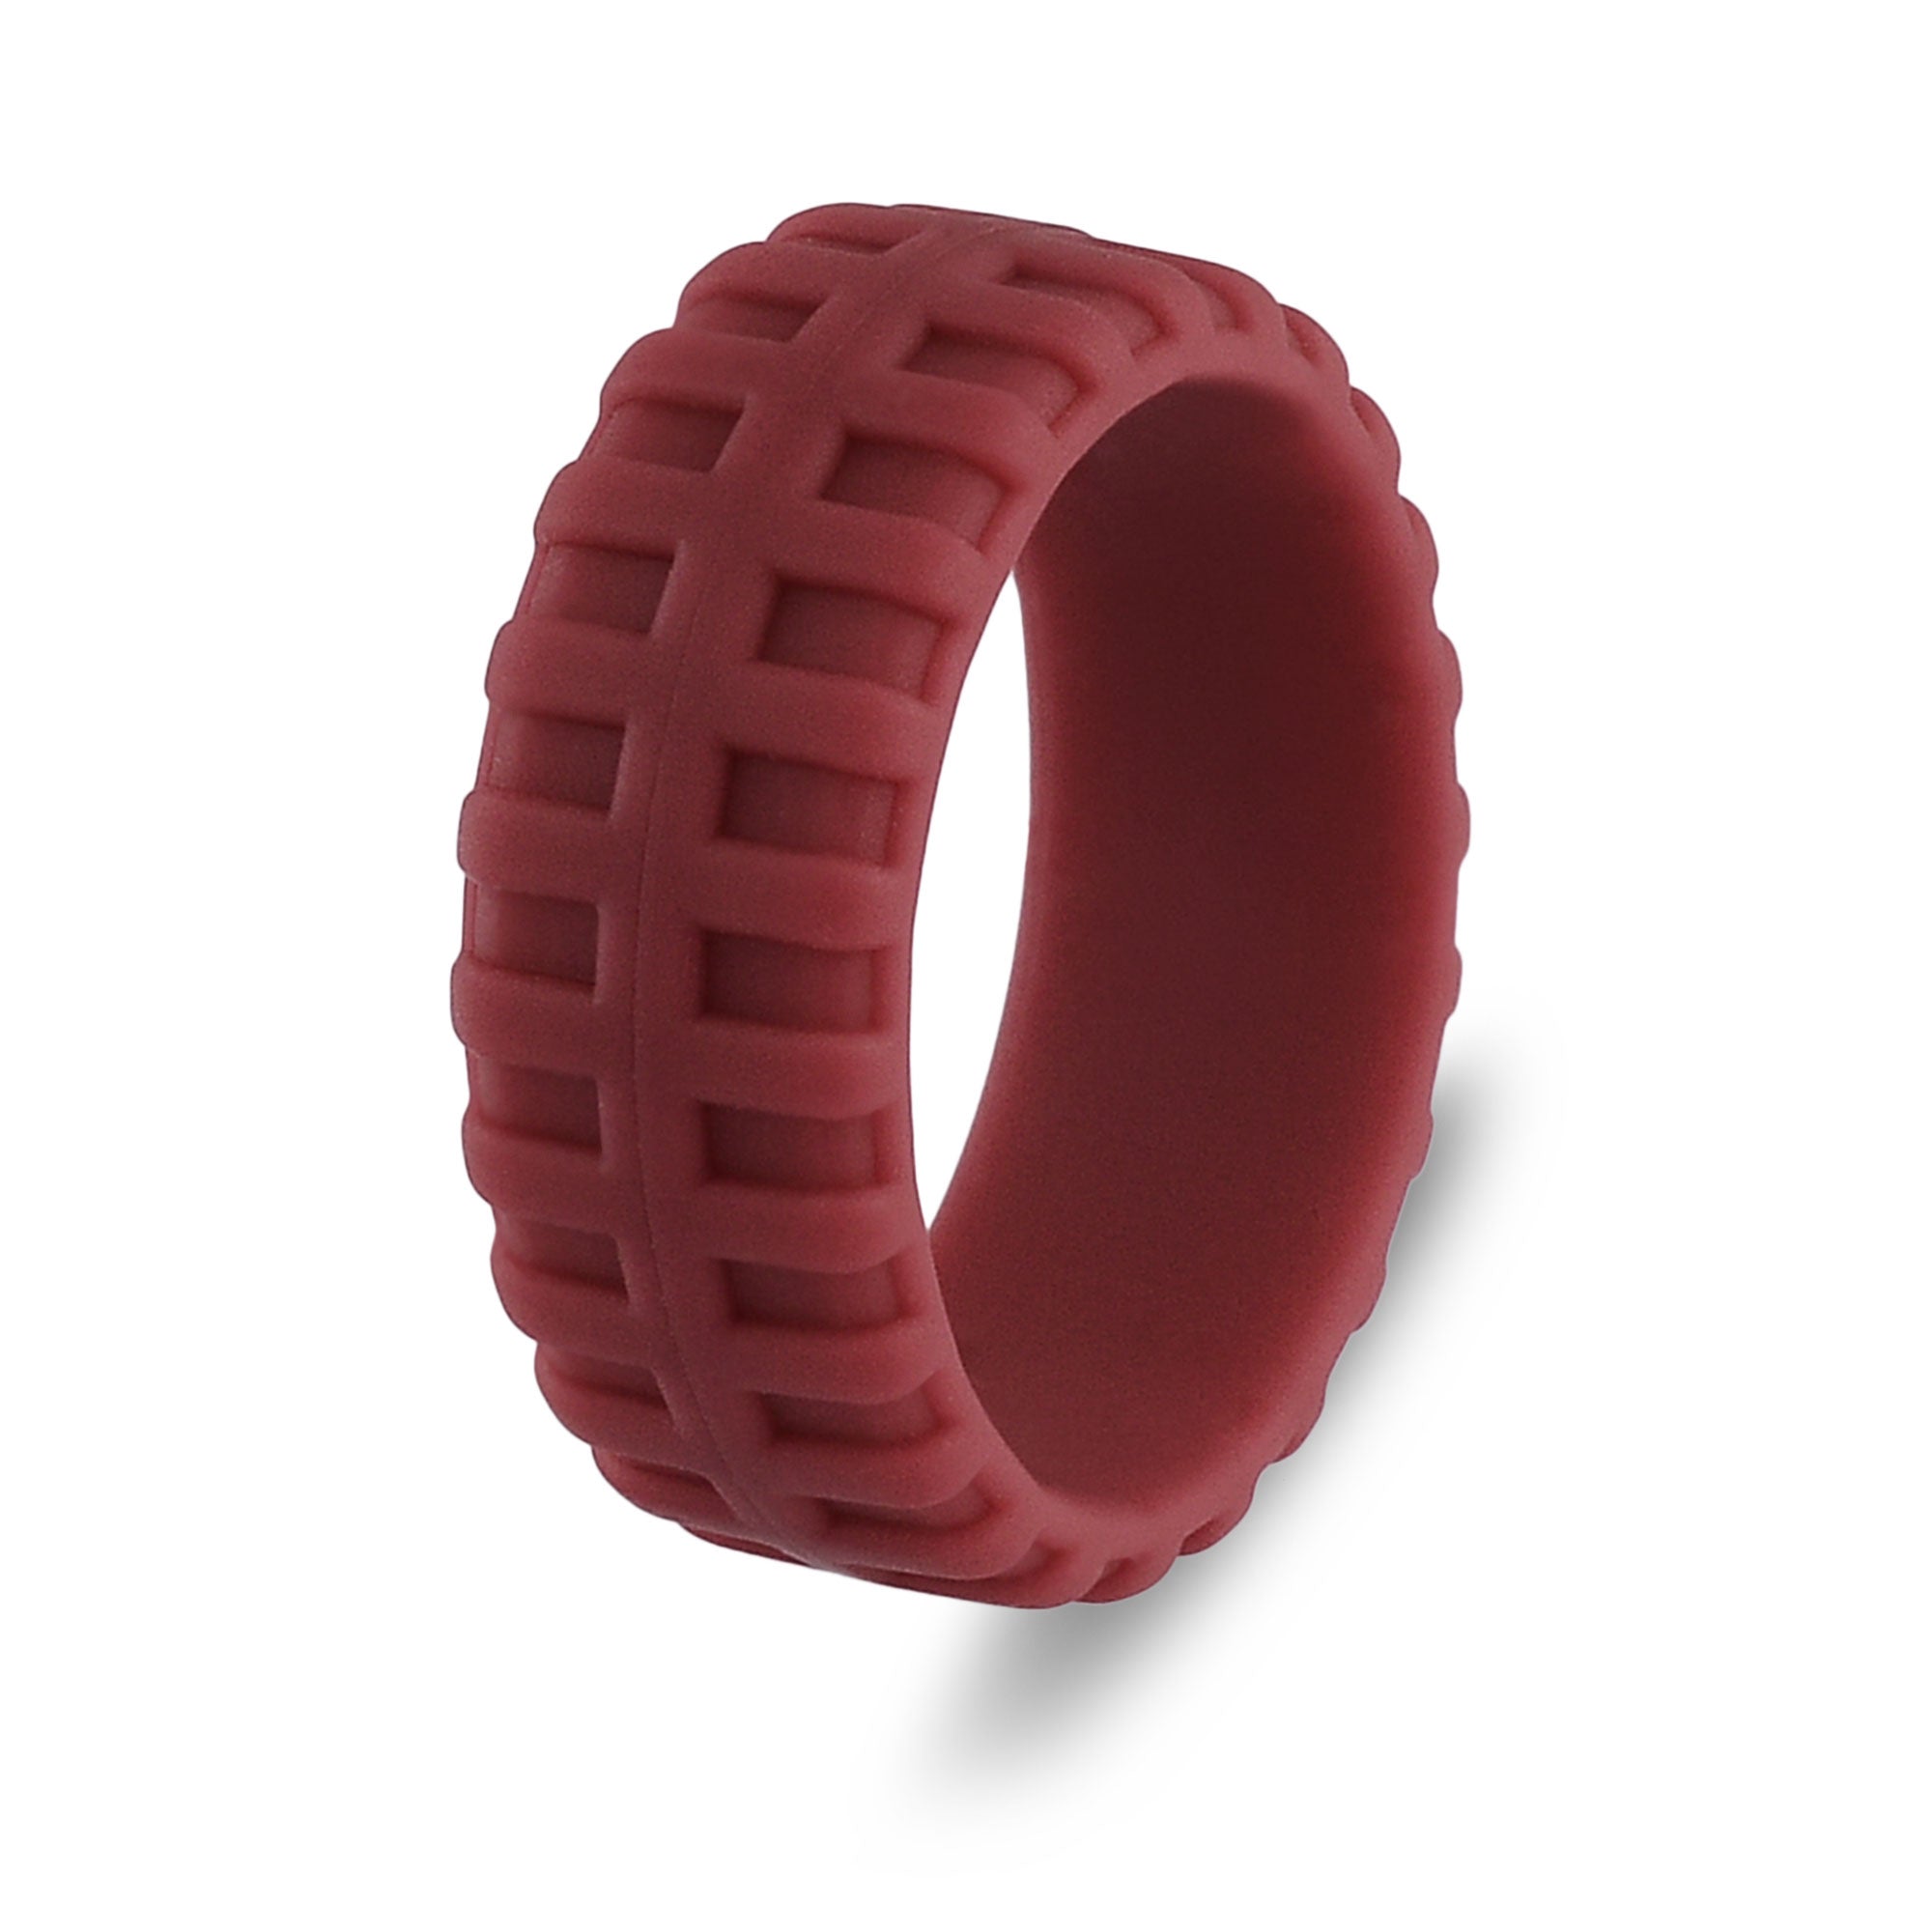 The Garnet - Silicone Ring